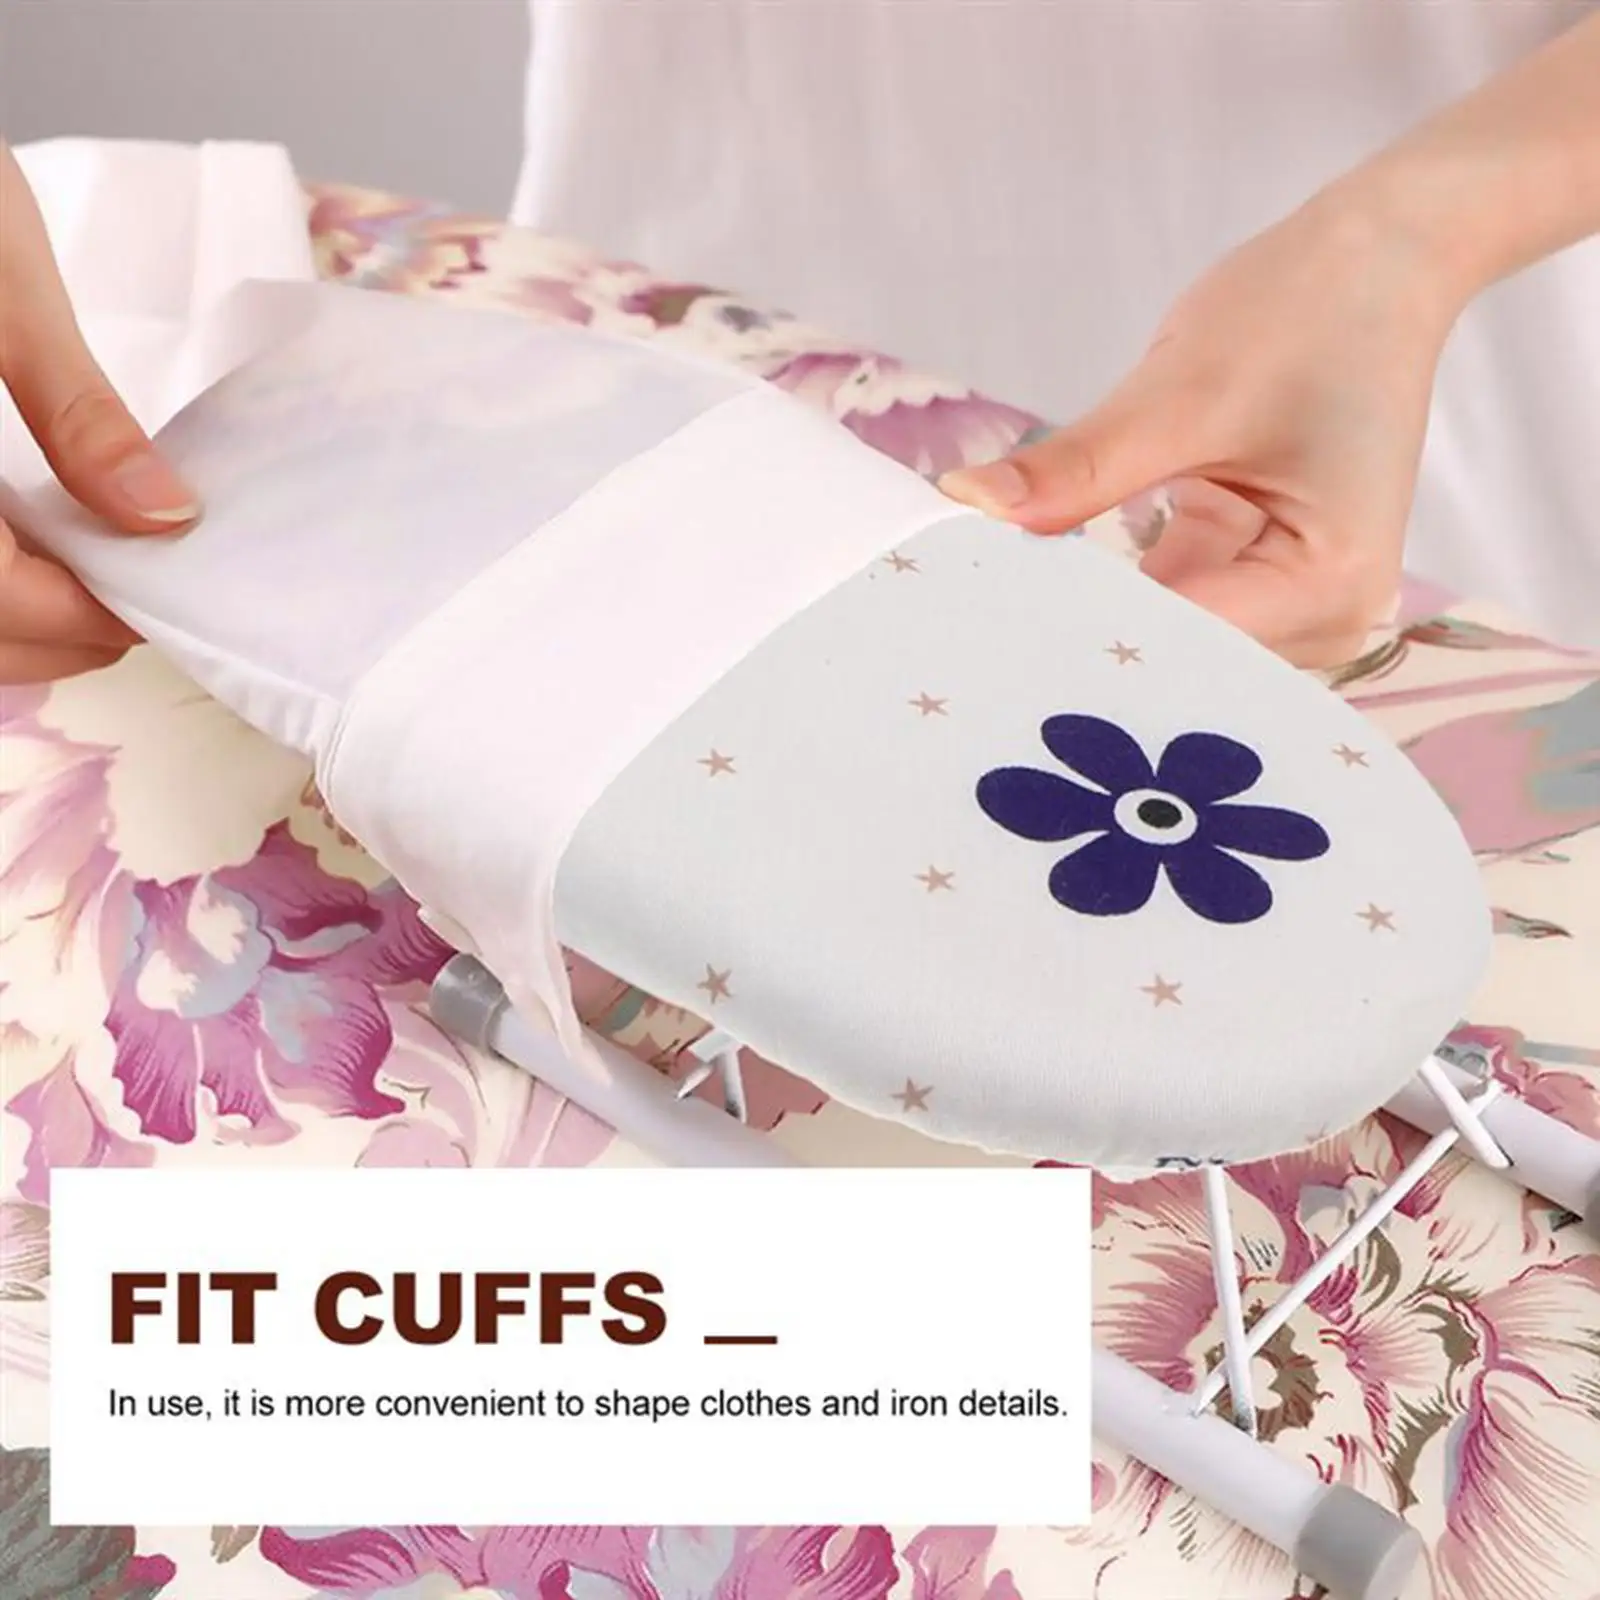 Portable Ironing Board Removable Sleeve for Countertop Home Dorms Ironing Clothes